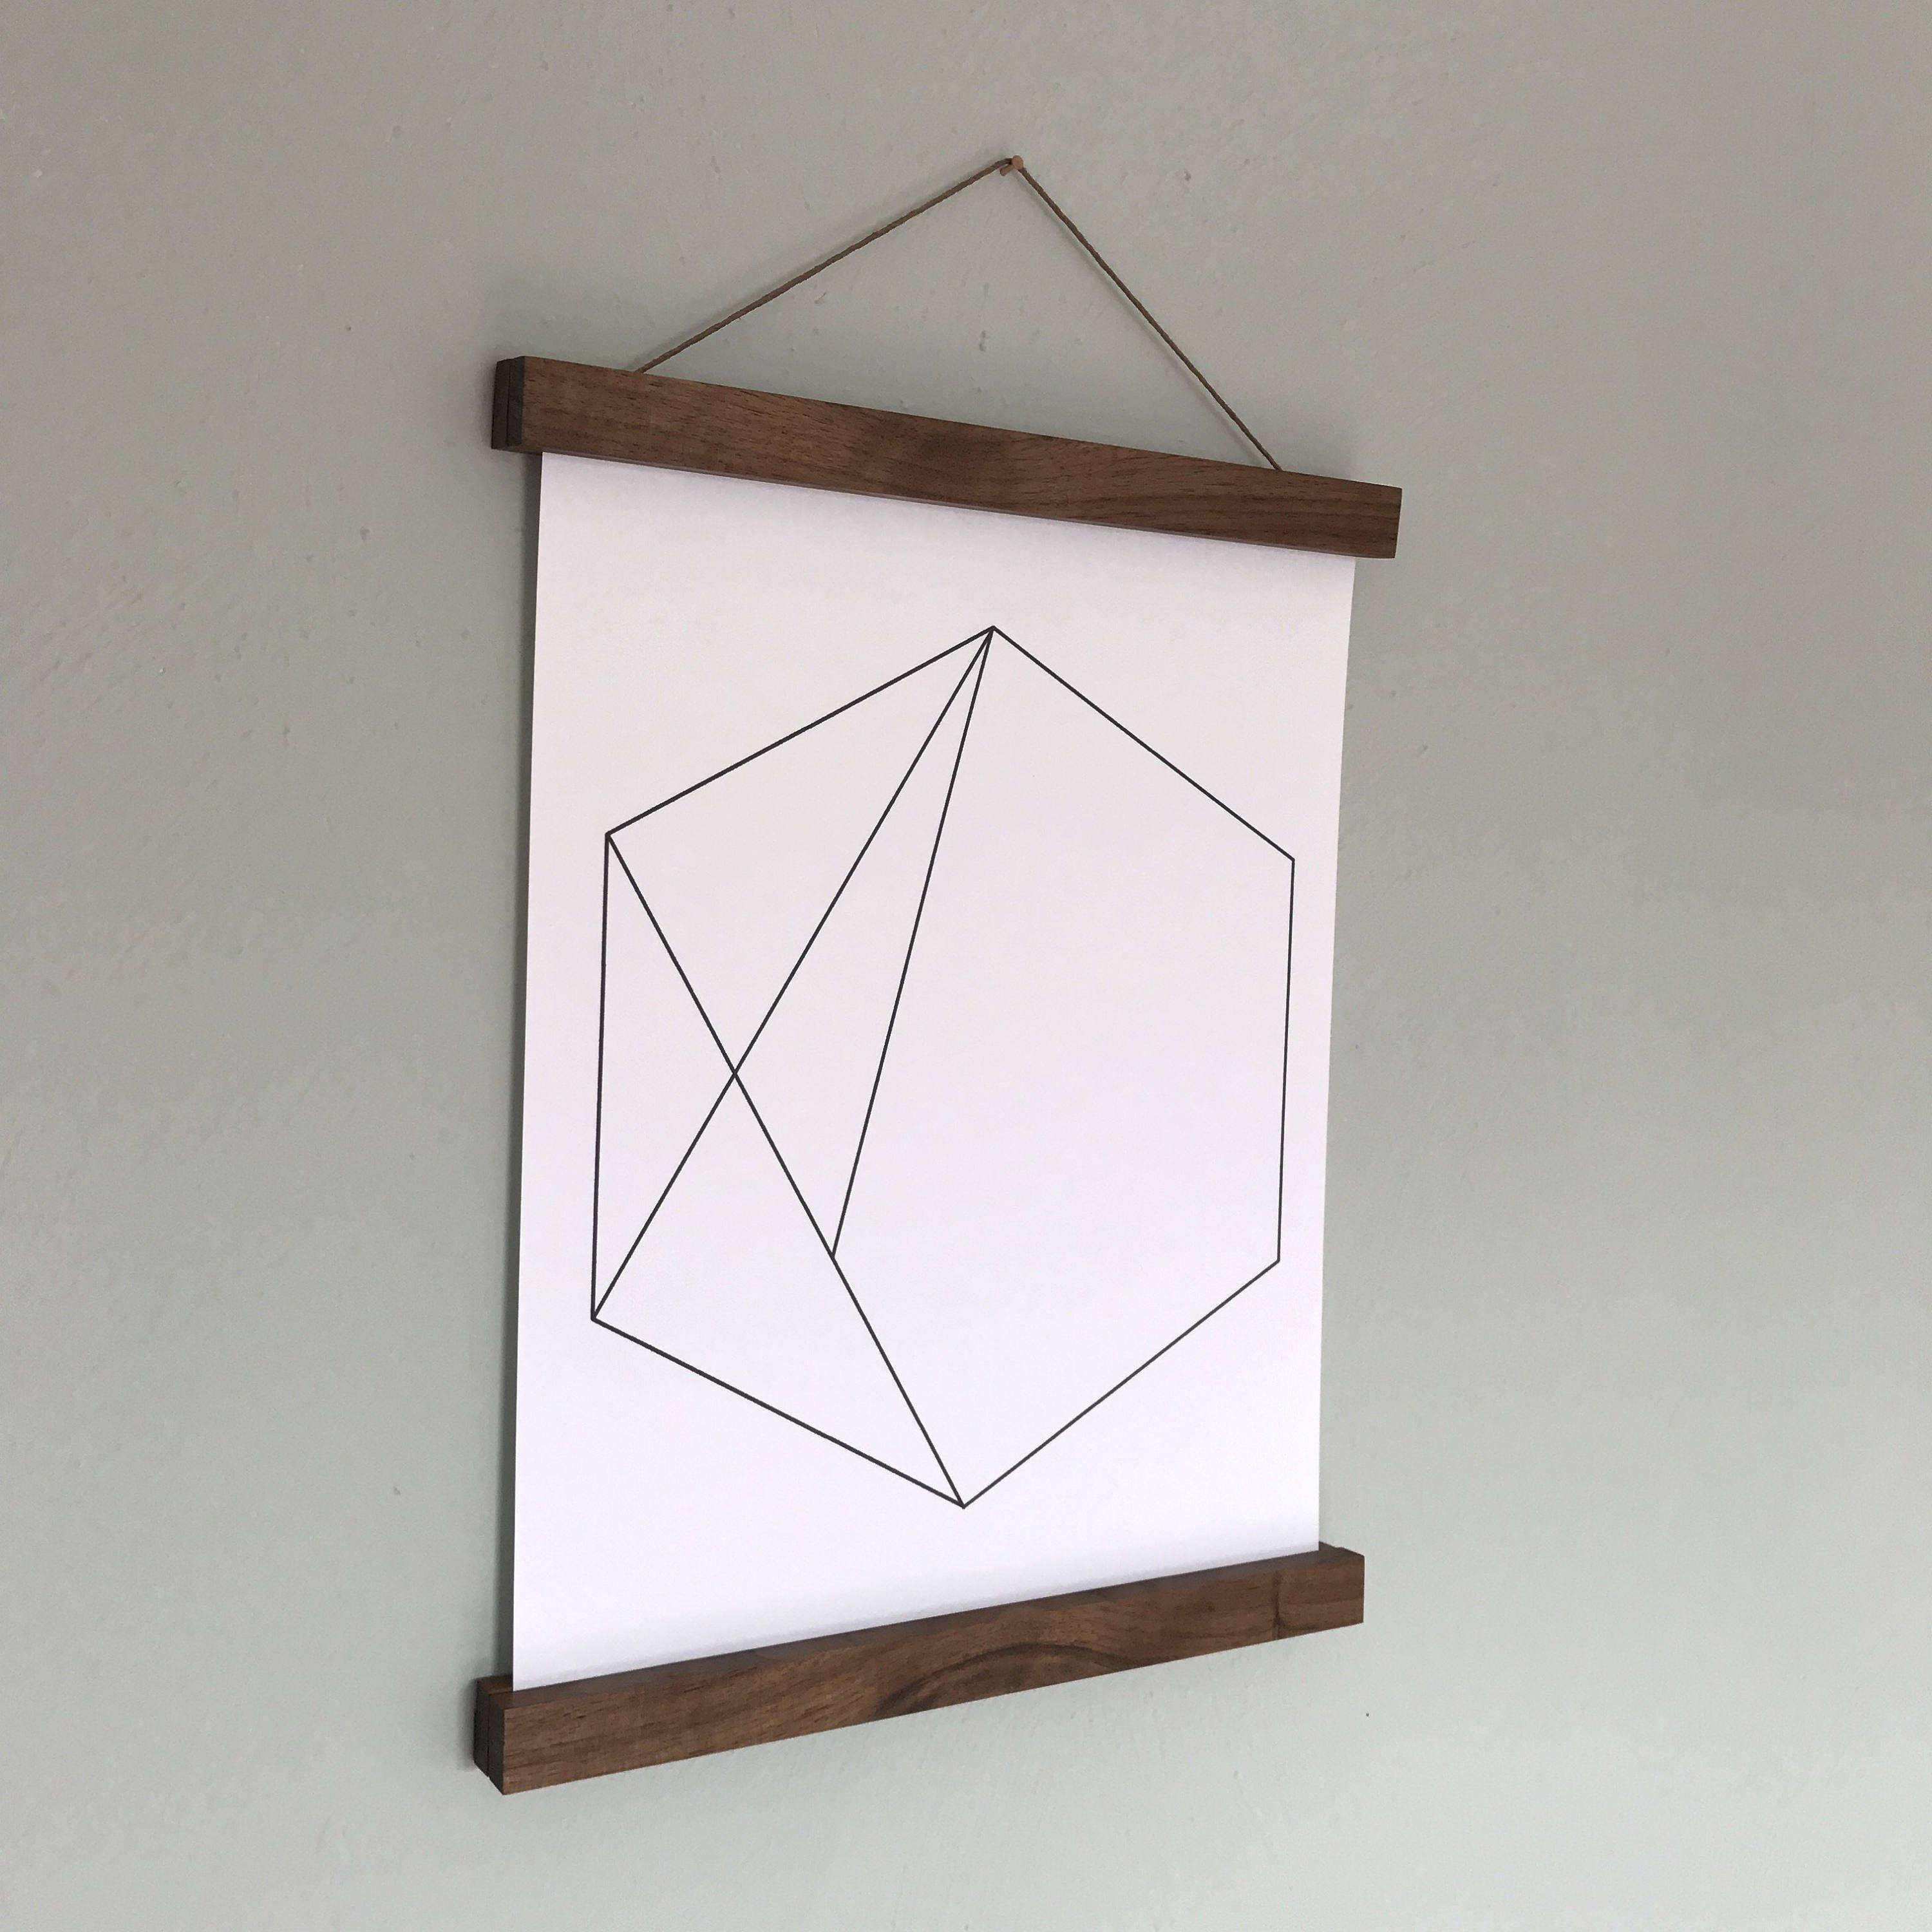 A wooden poster hanger frame with an abstract print